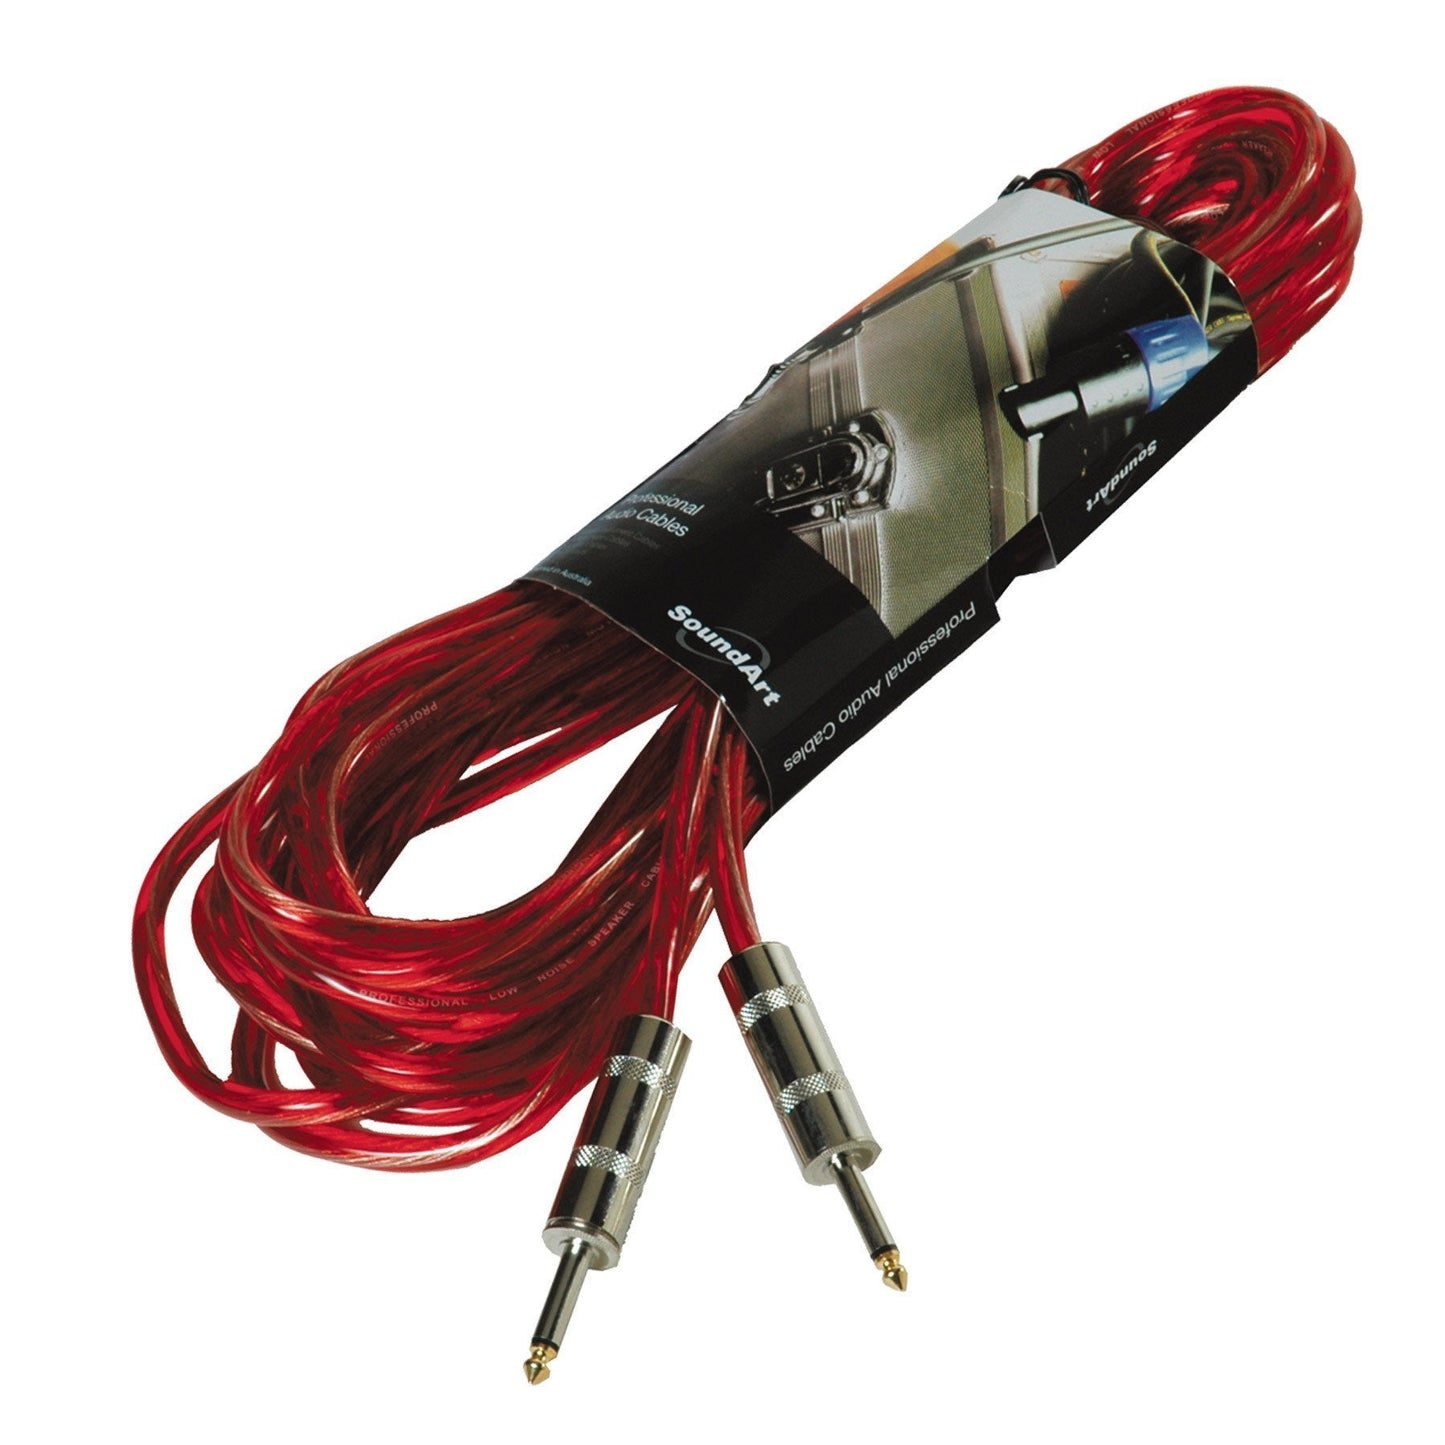 SoundArt Braided PA Speaker Cable with Jack to Jack Connectors (10m)